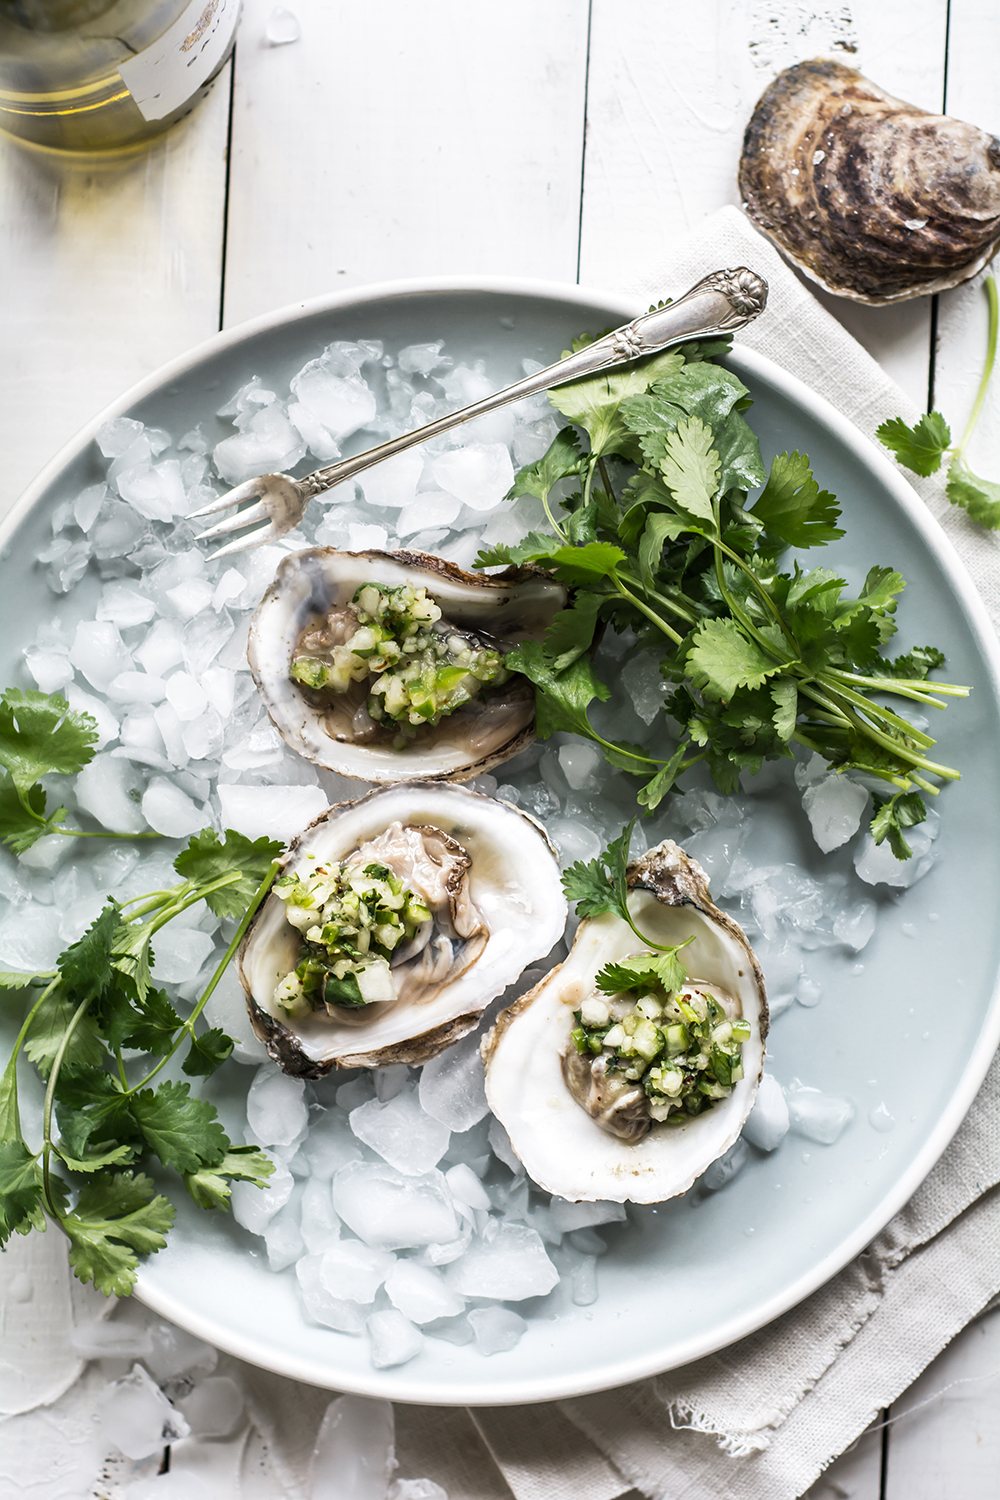 Oysters with Cilantro-Chile Topping